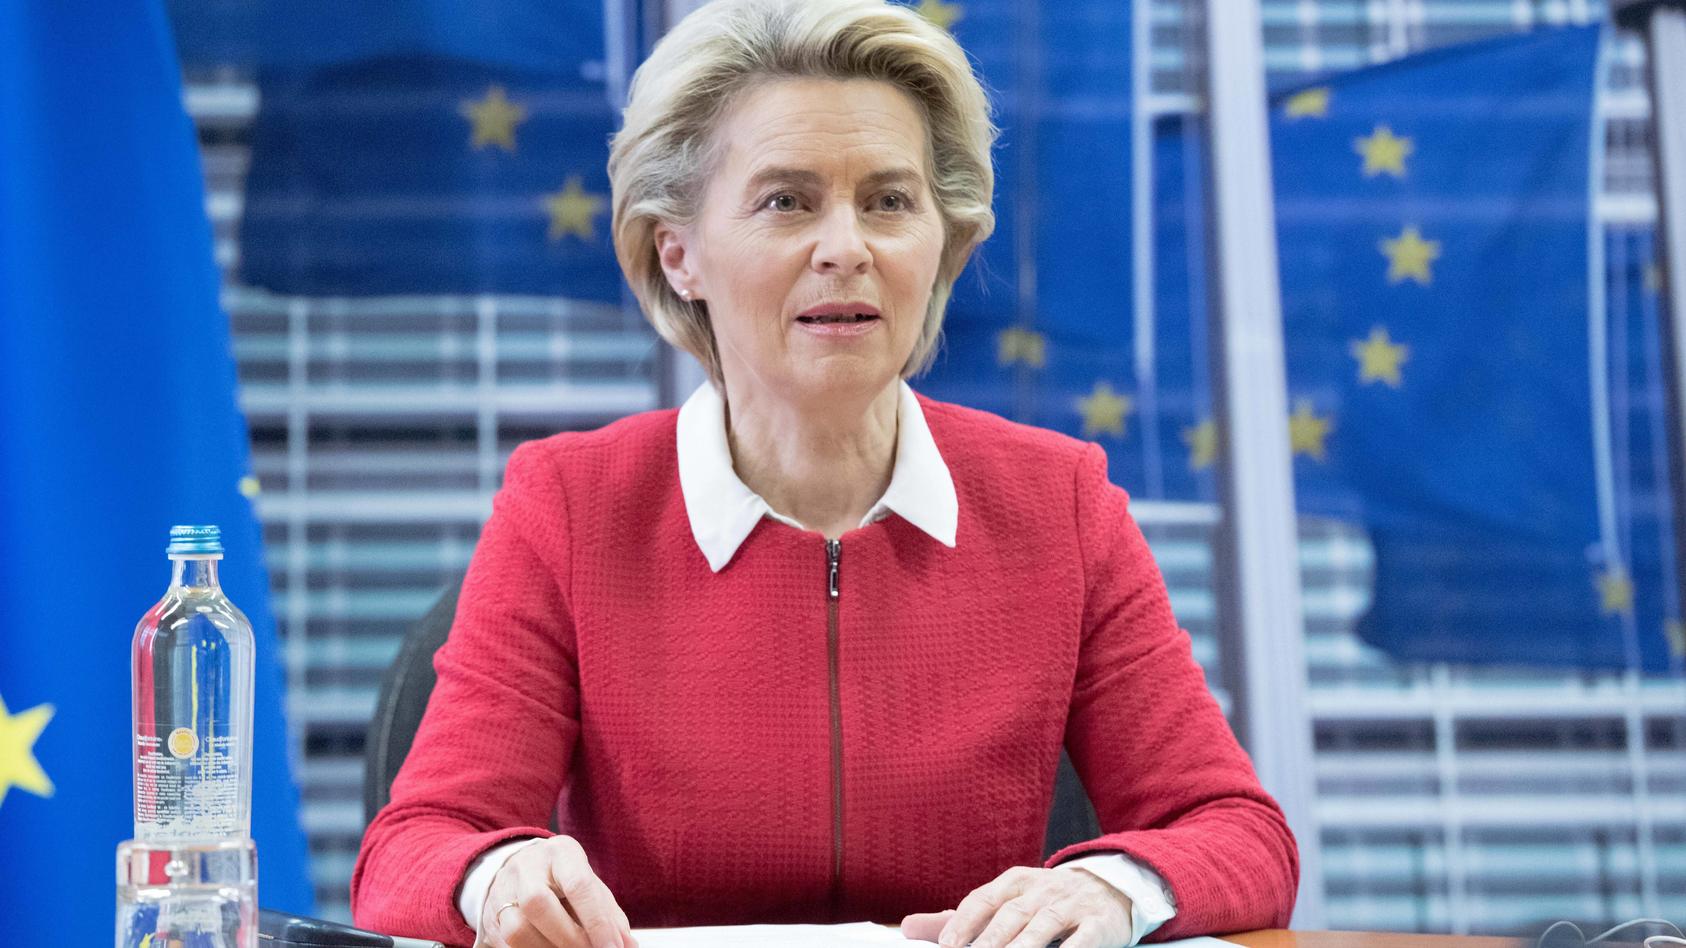  201111 -- BRUSSELS, Nov. 11, 2020  -- European Commission President Ursula Von Der Leyen attends an anti-terrorism video conference in Brussels, Belgium, Nov. 10, 2020. The European Union EU on Tuseday held a video conference with Austria, Germany, 